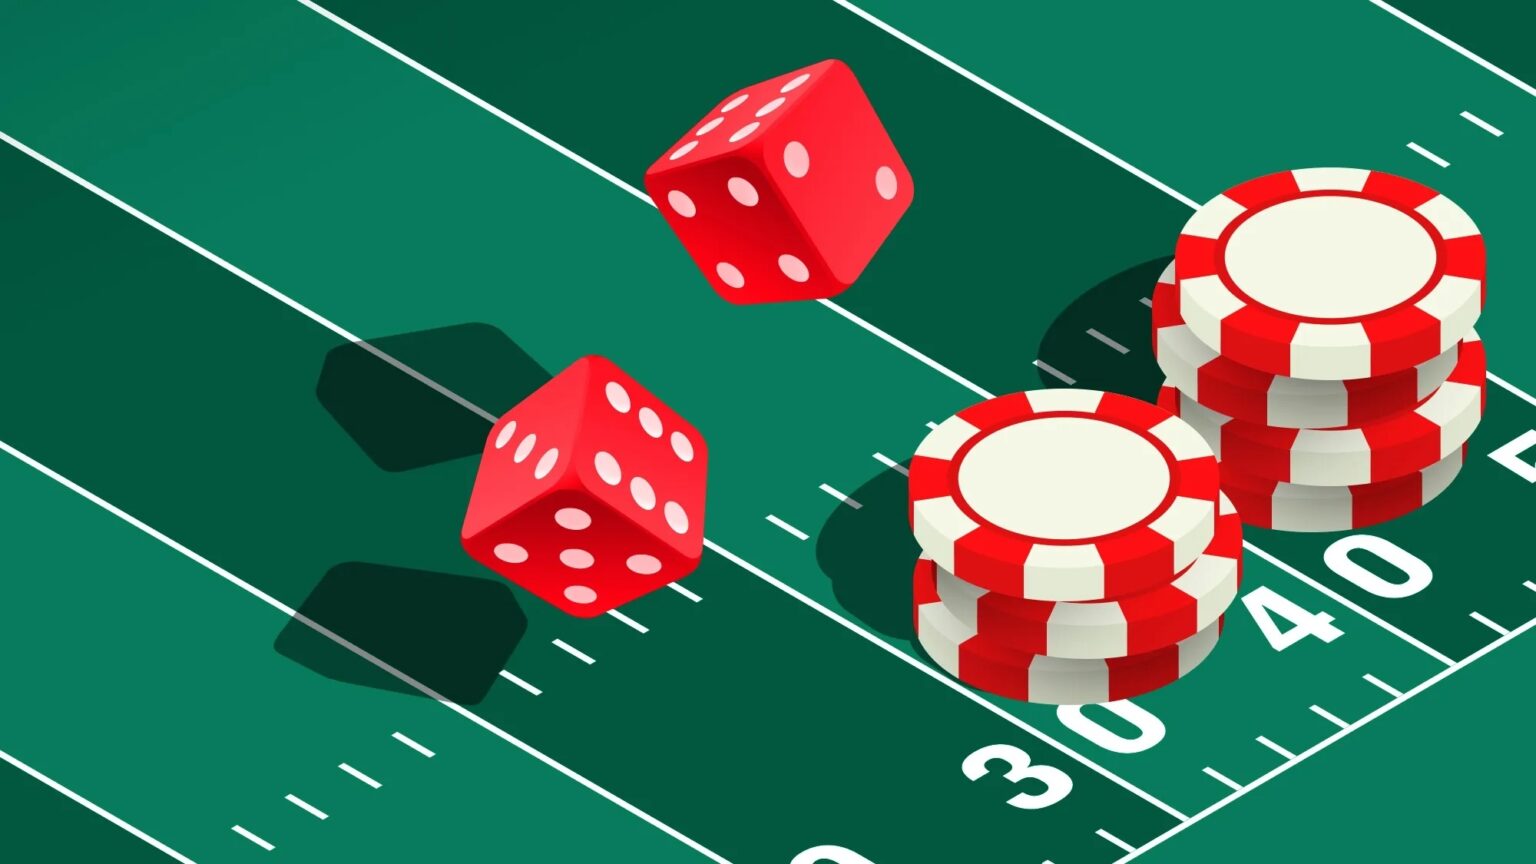 Stepping into the world of sports betting? We've rounded up the top 5 strategies for successful sports betting.